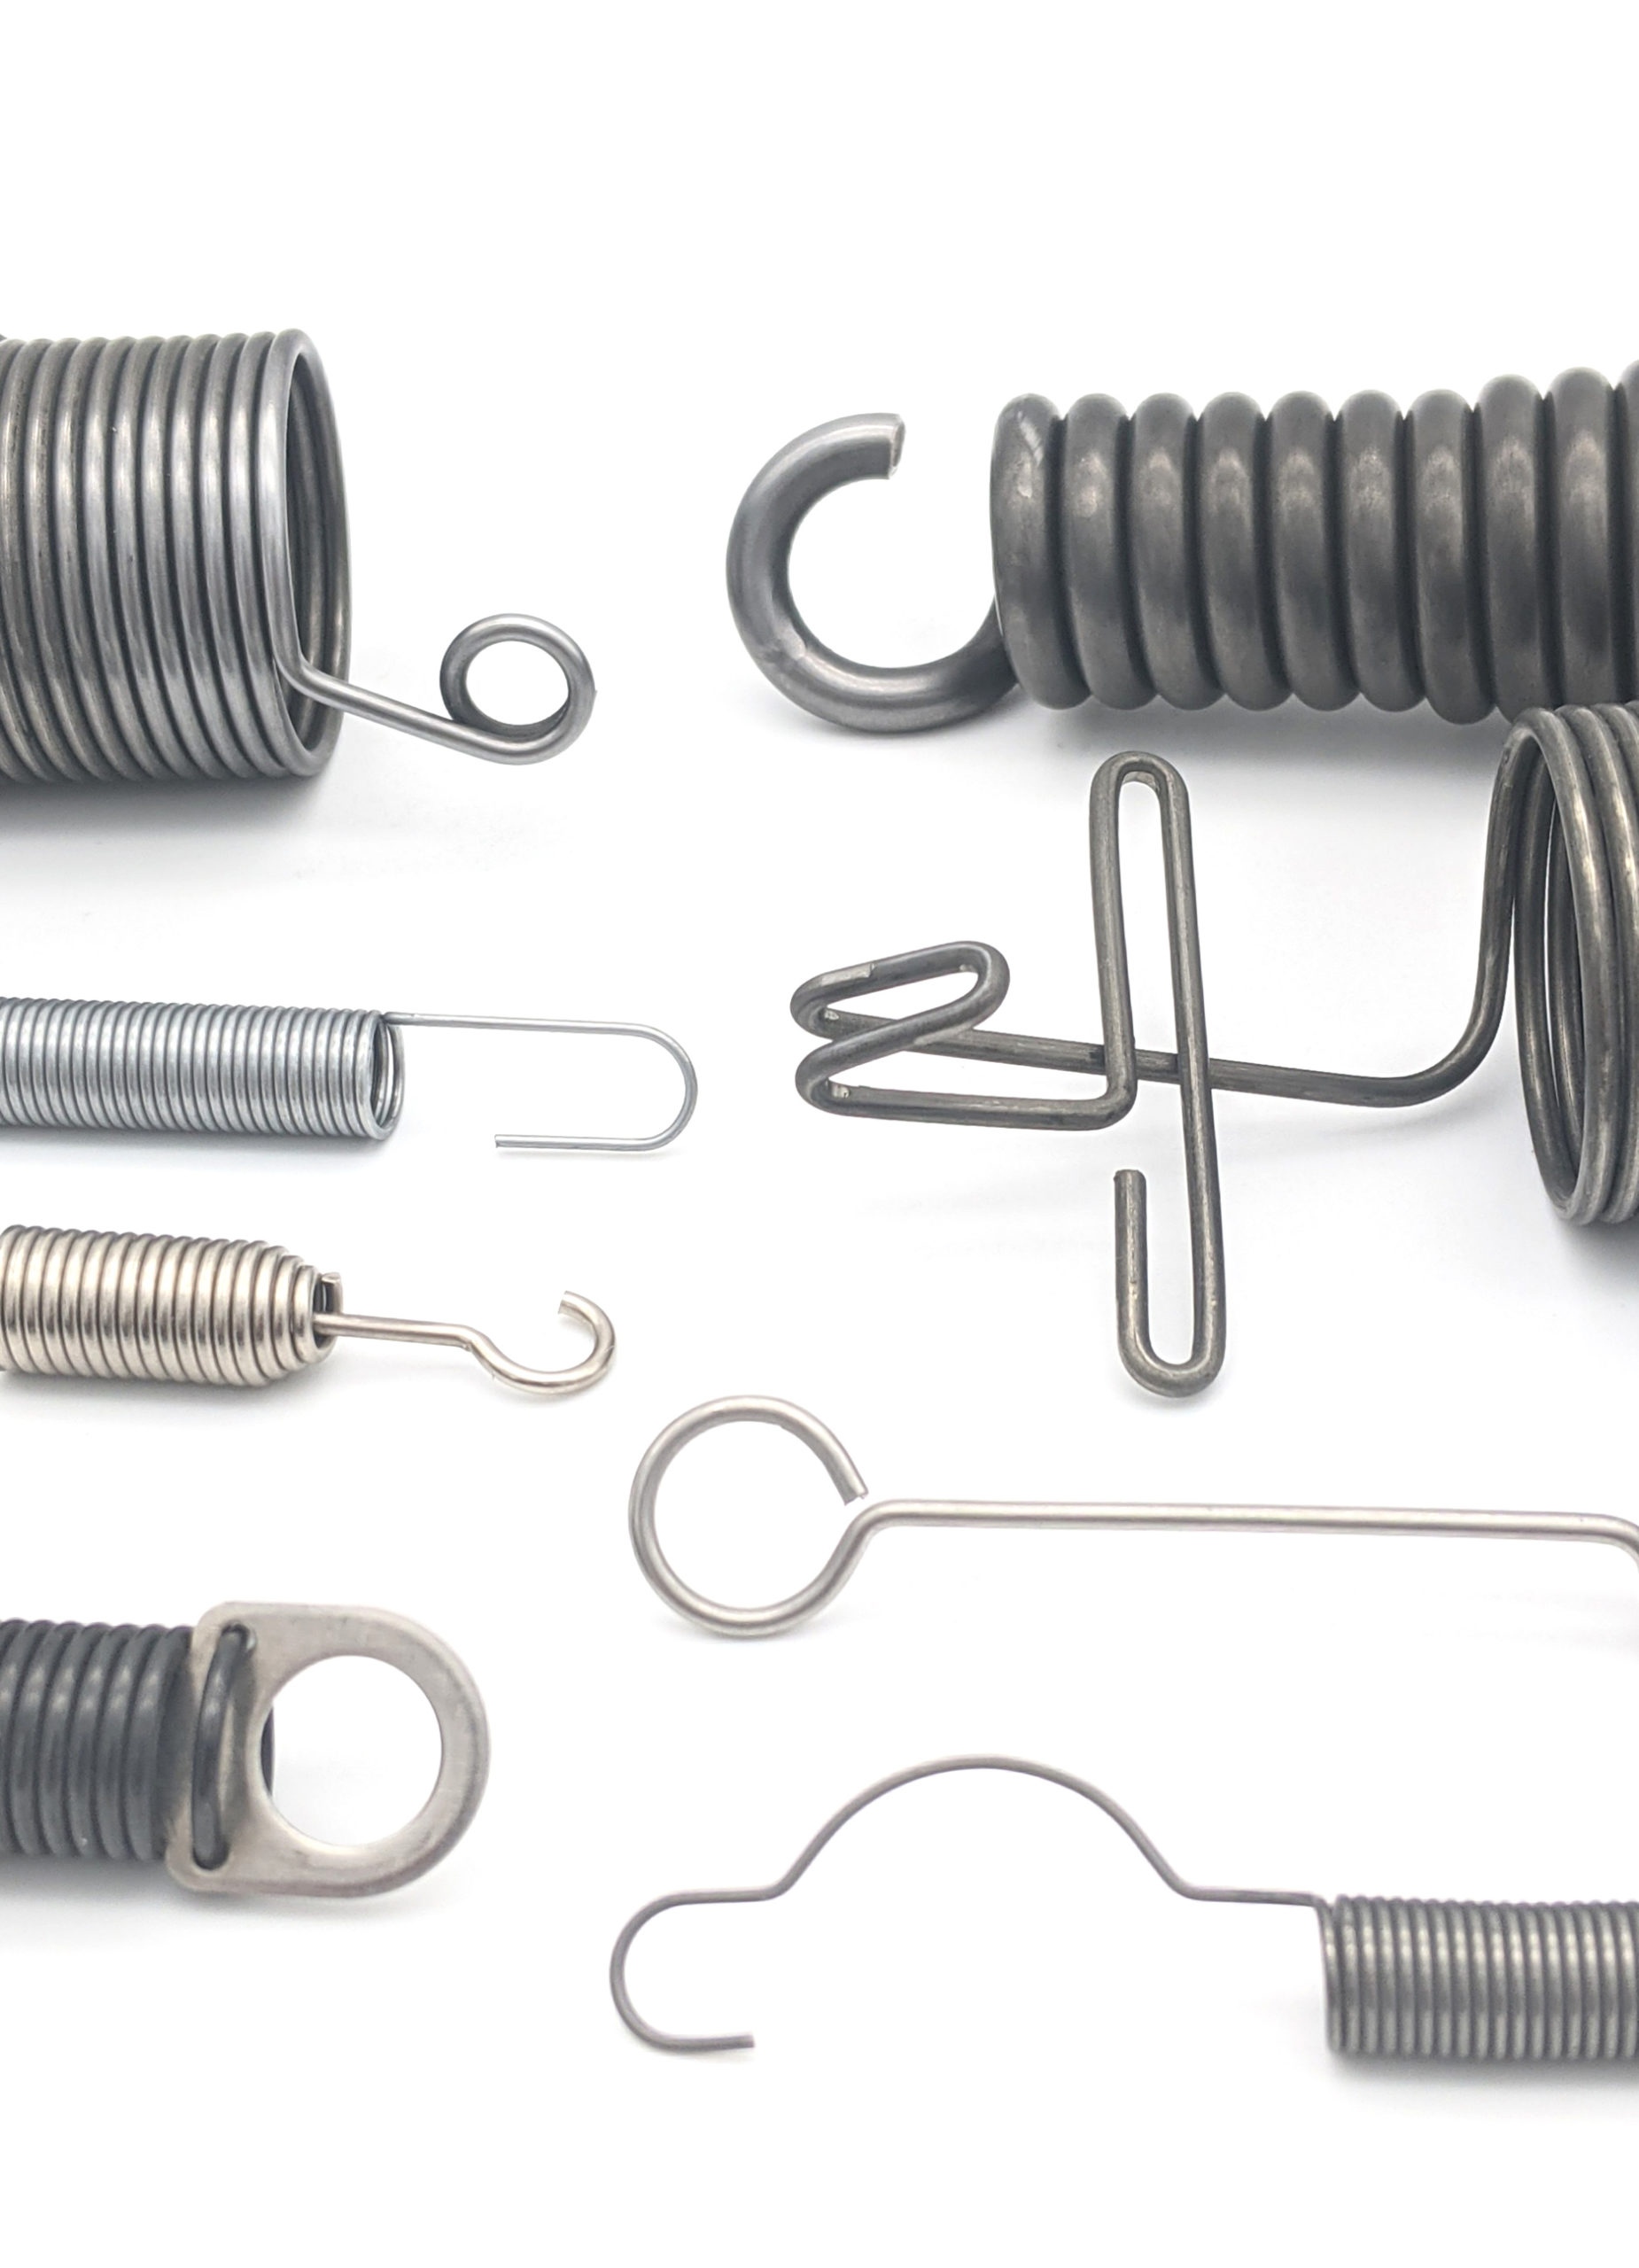 Details about   0.4-1.4mm Hook Expansion Extension Tension Springs Zinc-plated Spring Steel 